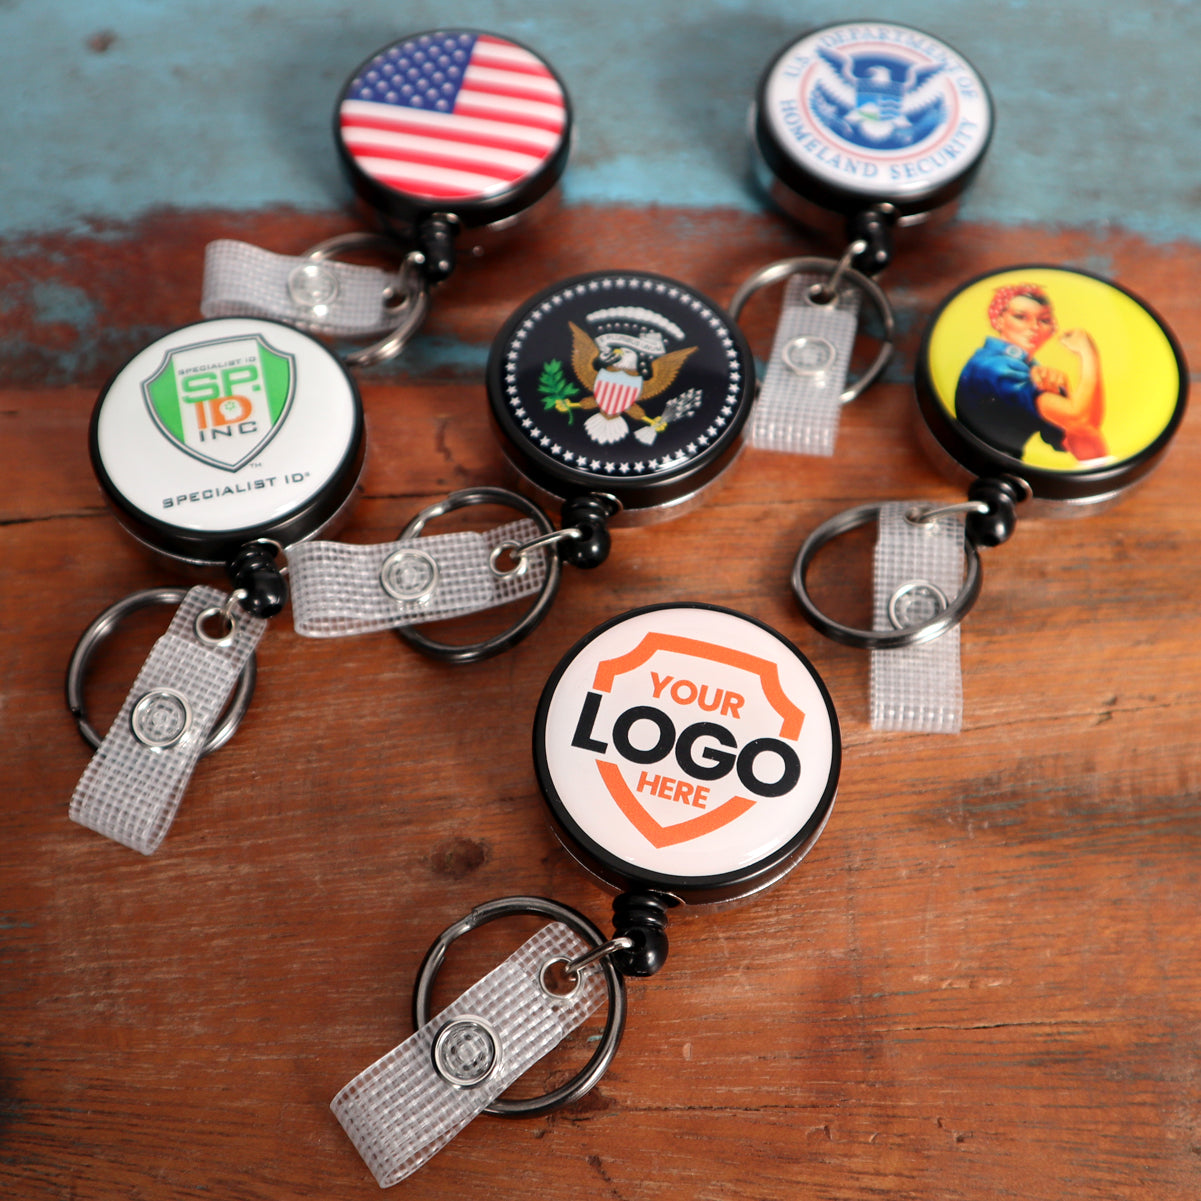 A set of six Custom Heavy Duty Badge Reel with Key Ring and Badge Strap (SPID-3180) - Add Your Logo with various designs, including a US flag, insignias, "Your Logo Here," and a "We Can Do It!" poster, featuring key rings and badge straps on a wooden surface.